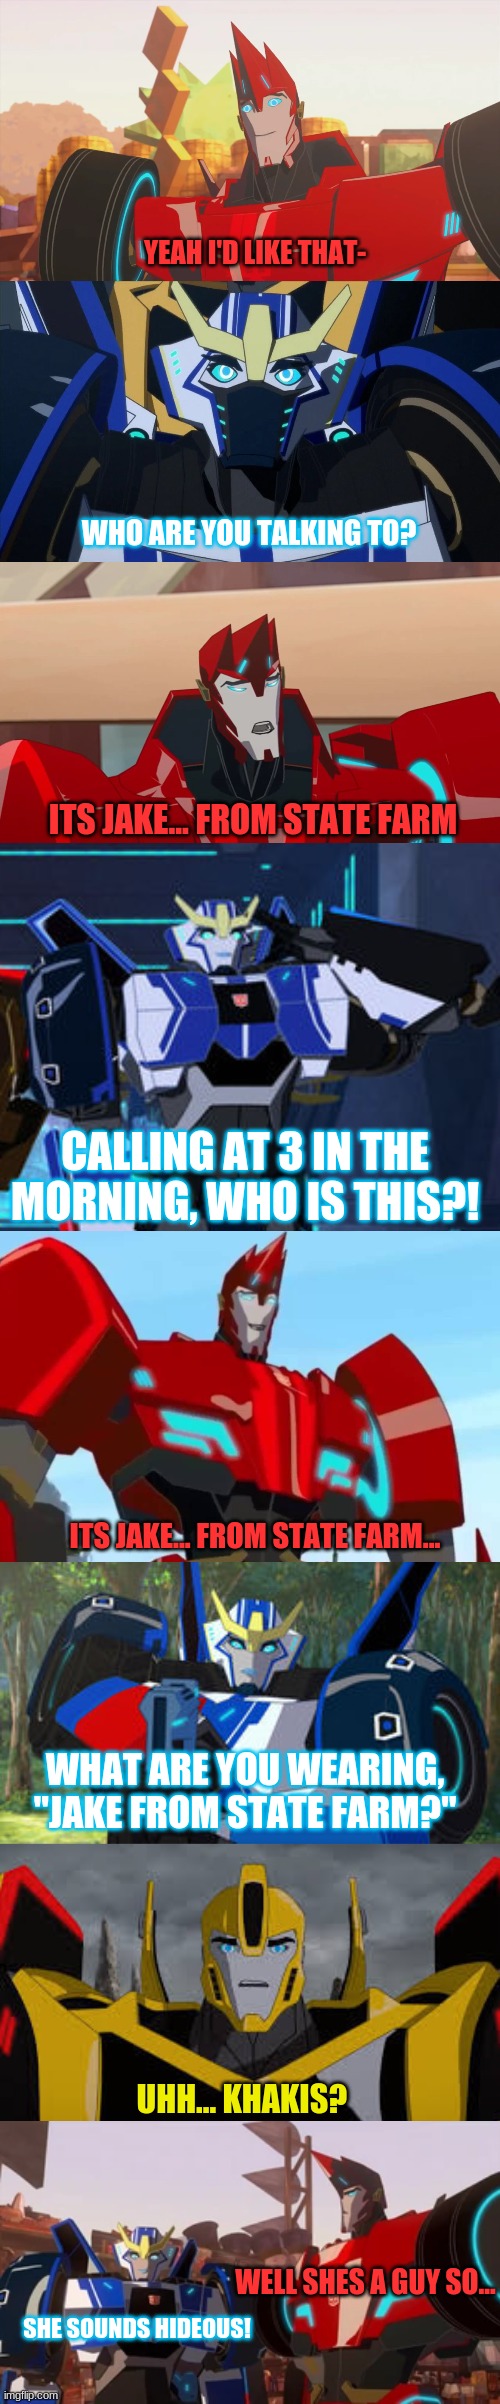 Ok ok... I'll make a transformers RID meme | YEAH I'D LIKE THAT-; WHO ARE YOU TALKING TO? ITS JAKE... FROM STATE FARM; CALLING AT 3 IN THE MORNING, WHO IS THIS?! ITS JAKE... FROM STATE FARM... WHAT ARE YOU WEARING, "JAKE FROM STATE FARM?"; UHH... KHAKIS? WELL SHES A GUY SO... SHE SOUNDS HIDEOUS! | image tagged in tfp,transformers | made w/ Imgflip meme maker